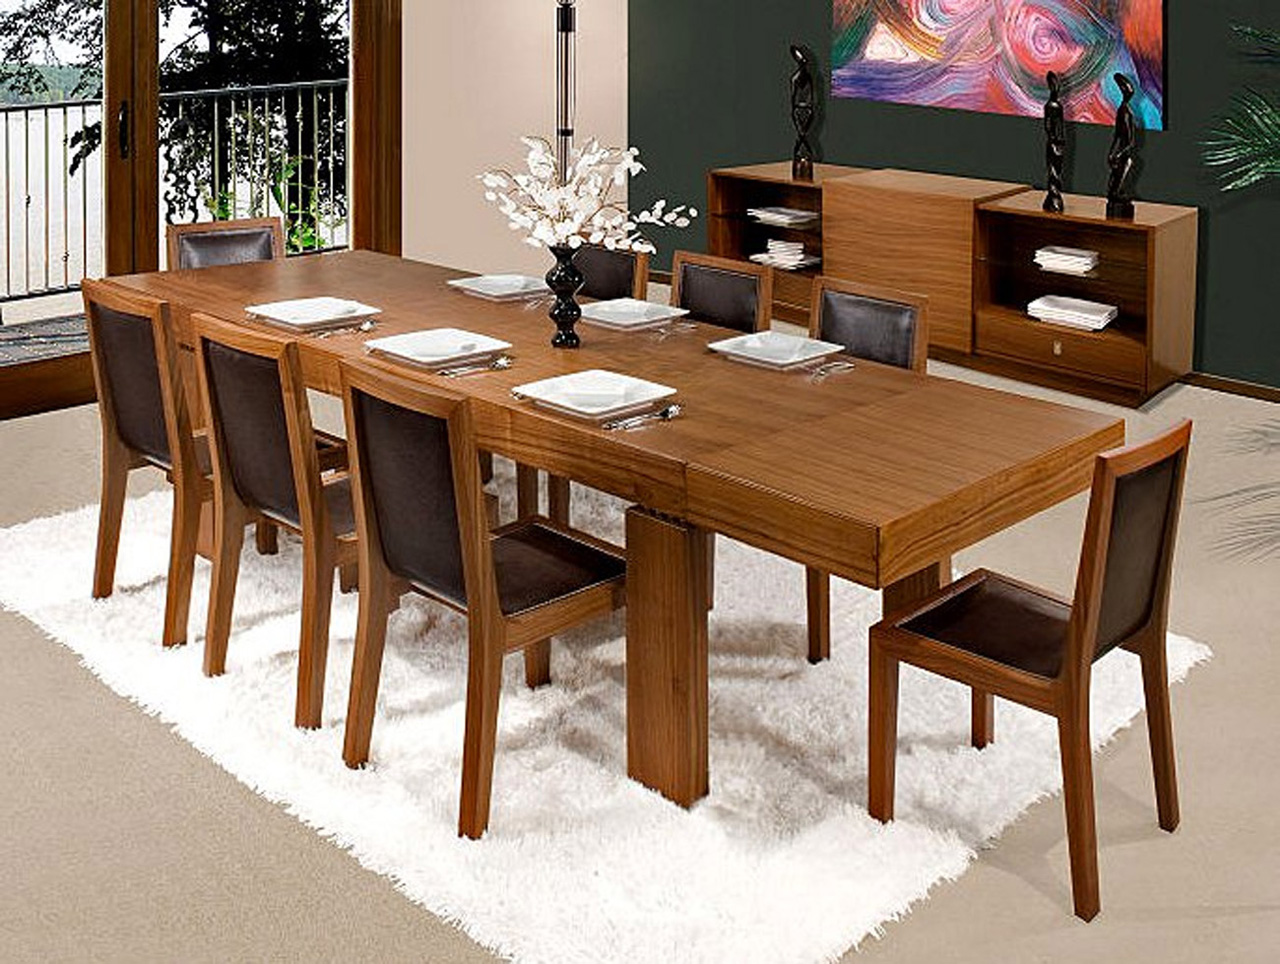 Expanding Dining Hutch Attractive Expanding Dining Room Tables Hutch Furniture Ideas With Simple Wooden Dining Chairs With Padded Seats For 8 Persons Plus Modern Thick Padded Carpet Ideas Dining Room Choosing The Right Dining Room Tables